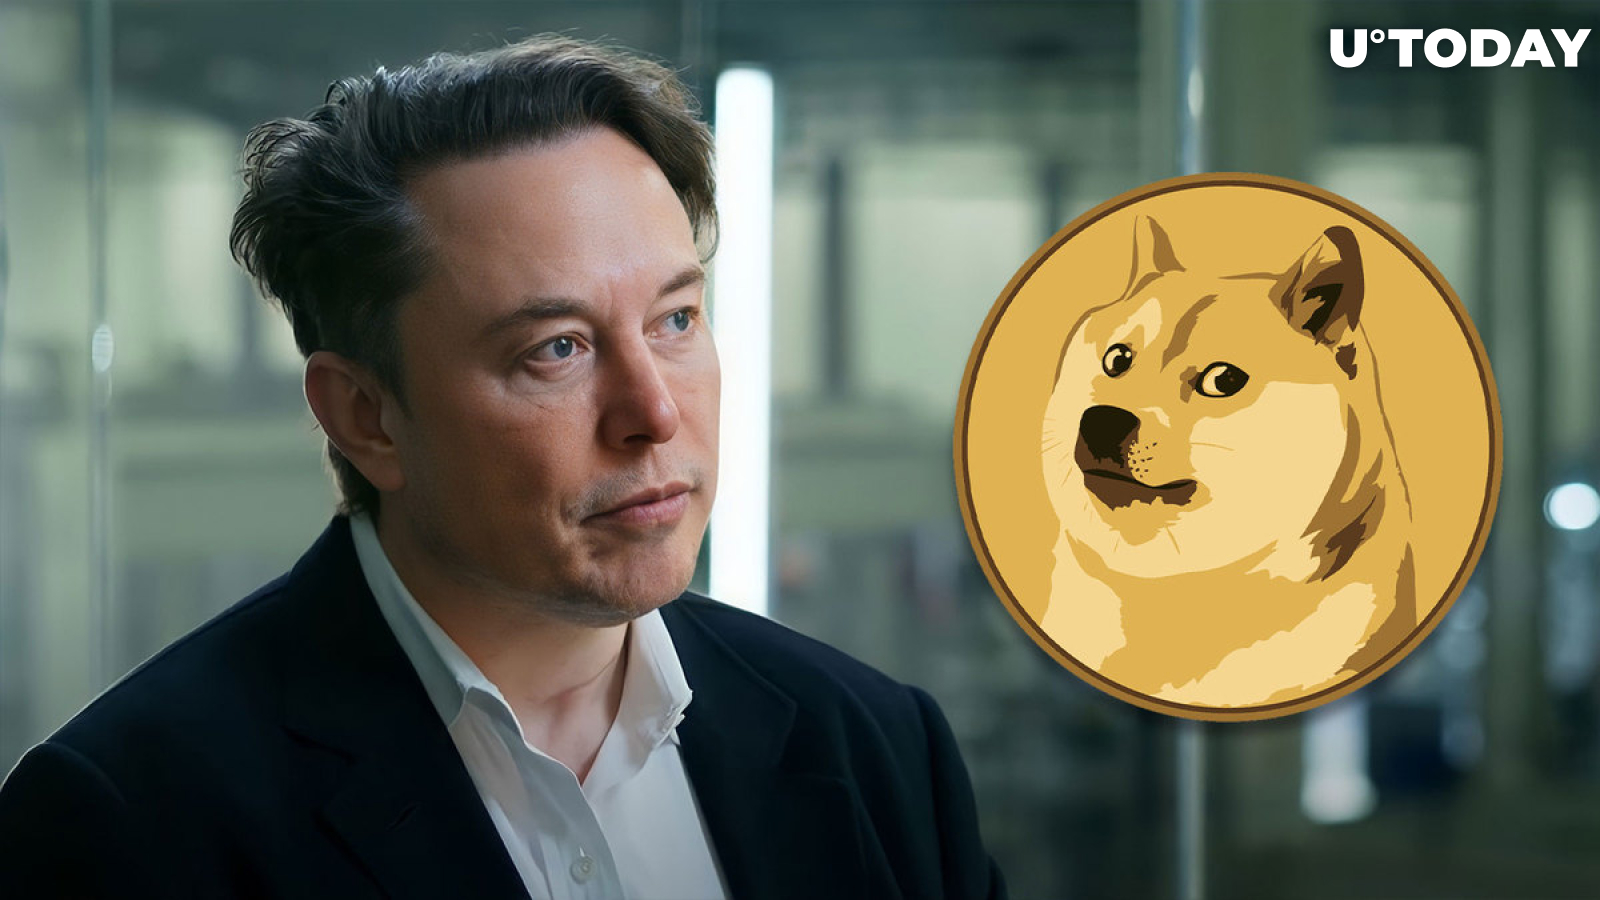 Dogecoin Founder Reveals Why He Does Not Want to Work for Elon Musk